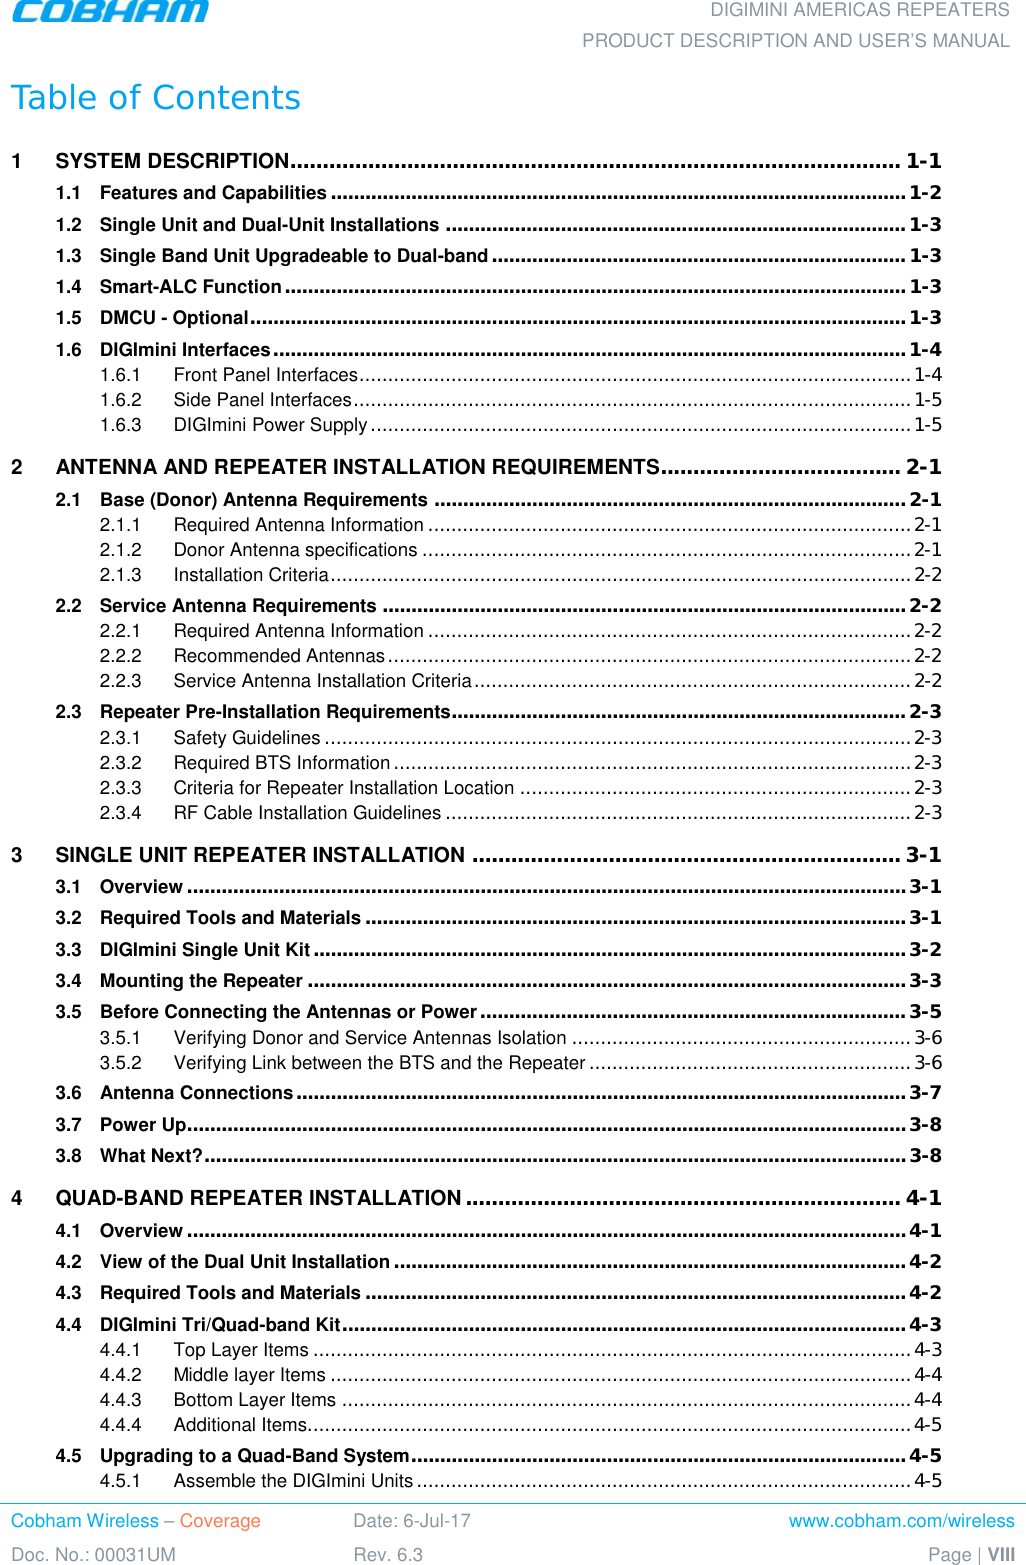  DIGIMINI AMERICAS REPEATERS PRODUCT DESCRIPTION AND USER’S MANUAL Cobham Wireless – Coverage Date: 6-Jul-17 www.cobham.com/wireless Doc. No.: 00031UM Rev. 6.3 Page | VIII  Table of Contents 1 SYSTEM DESCRIPTION .............................................................................................. 1-1 1.1 Features and Capabilities .................................................................................................... 1-2 1.2 Single Unit and Dual-Unit Installations ................................................................................ 1-3 1.3 Single Band Unit Upgradeable to Dual-band ........................................................................ 1-3 1.4 Smart-ALC Function ............................................................................................................ 1-3 1.5 DMCU - Optional .................................................................................................................. 1-3 1.6 DIGImini Interfaces .............................................................................................................. 1-4 1.6.1 Front Panel Interfaces ................................................................................................ 1-4 1.6.2 Side Panel Interfaces ................................................................................................. 1-5 1.6.3 DIGImini Power Supply .............................................................................................. 1-5 2 ANTENNA AND REPEATER INSTALLATION REQUIREMENTS ..................................... 2-1 2.1 Base (Donor) Antenna Requirements .................................................................................. 2-1 2.1.1 Required Antenna Information .................................................................................... 2-1 2.1.2 Donor Antenna specifications ..................................................................................... 2-1 2.1.3 Installation Criteria ..................................................................................................... 2-2 2.2 Service Antenna Requirements ........................................................................................... 2-2 2.2.1 Required Antenna Information .................................................................................... 2-2 2.2.2 Recommended Antennas ........................................................................................... 2-2 2.2.3 Service Antenna Installation Criteria ............................................................................ 2-2 2.3 Repeater Pre-Installation Requirements............................................................................... 2-3 2.3.1 Safety Guidelines ...................................................................................................... 2-3 2.3.2 Required BTS Information .......................................................................................... 2-3 2.3.3 Criteria for Repeater Installation Location .................................................................... 2-3 2.3.4 RF Cable Installation Guidelines ................................................................................. 2-3 3 SINGLE UNIT REPEATER INSTALLATION .................................................................. 3-1 3.1 Overview ............................................................................................................................. 3-1 3.2 Required Tools and Materials .............................................................................................. 3-1 3.3 DIGImini Single Unit Kit ....................................................................................................... 3-2 3.4 Mounting the Repeater ........................................................................................................ 3-3 3.5 Before Connecting the Antennas or Power .......................................................................... 3-5 3.5.1 Verifying Donor and Service Antennas Isolation ........................................................... 3-6 3.5.2 Verifying Link between the BTS and the Repeater ........................................................ 3-6 3.6 Antenna Connections .......................................................................................................... 3-7 3.7 Power Up............................................................................................................................. 3-8 3.8 What Next? .......................................................................................................................... 3-8 4 QUAD-BAND REPEATER INSTALLATION ................................................................... 4-1 4.1 Overview ............................................................................................................................. 4-1 4.2 View of the Dual Unit Installation ......................................................................................... 4-2 4.3 Required Tools and Materials .............................................................................................. 4-2 4.4 DIGImini Tri/Quad-band Kit .................................................................................................. 4-3 4.4.1 Top Layer Items ........................................................................................................ 4-3 4.4.2 Middle layer Items ..................................................................................................... 4-4 4.4.3 Bottom Layer Items ................................................................................................... 4-4 4.4.4 Additional Items......................................................................................................... 4-5 4.5 Upgrading to a Quad-Band System ...................................................................................... 4-5 4.5.1 Assemble the DIGImini Units ...................................................................................... 4-5 